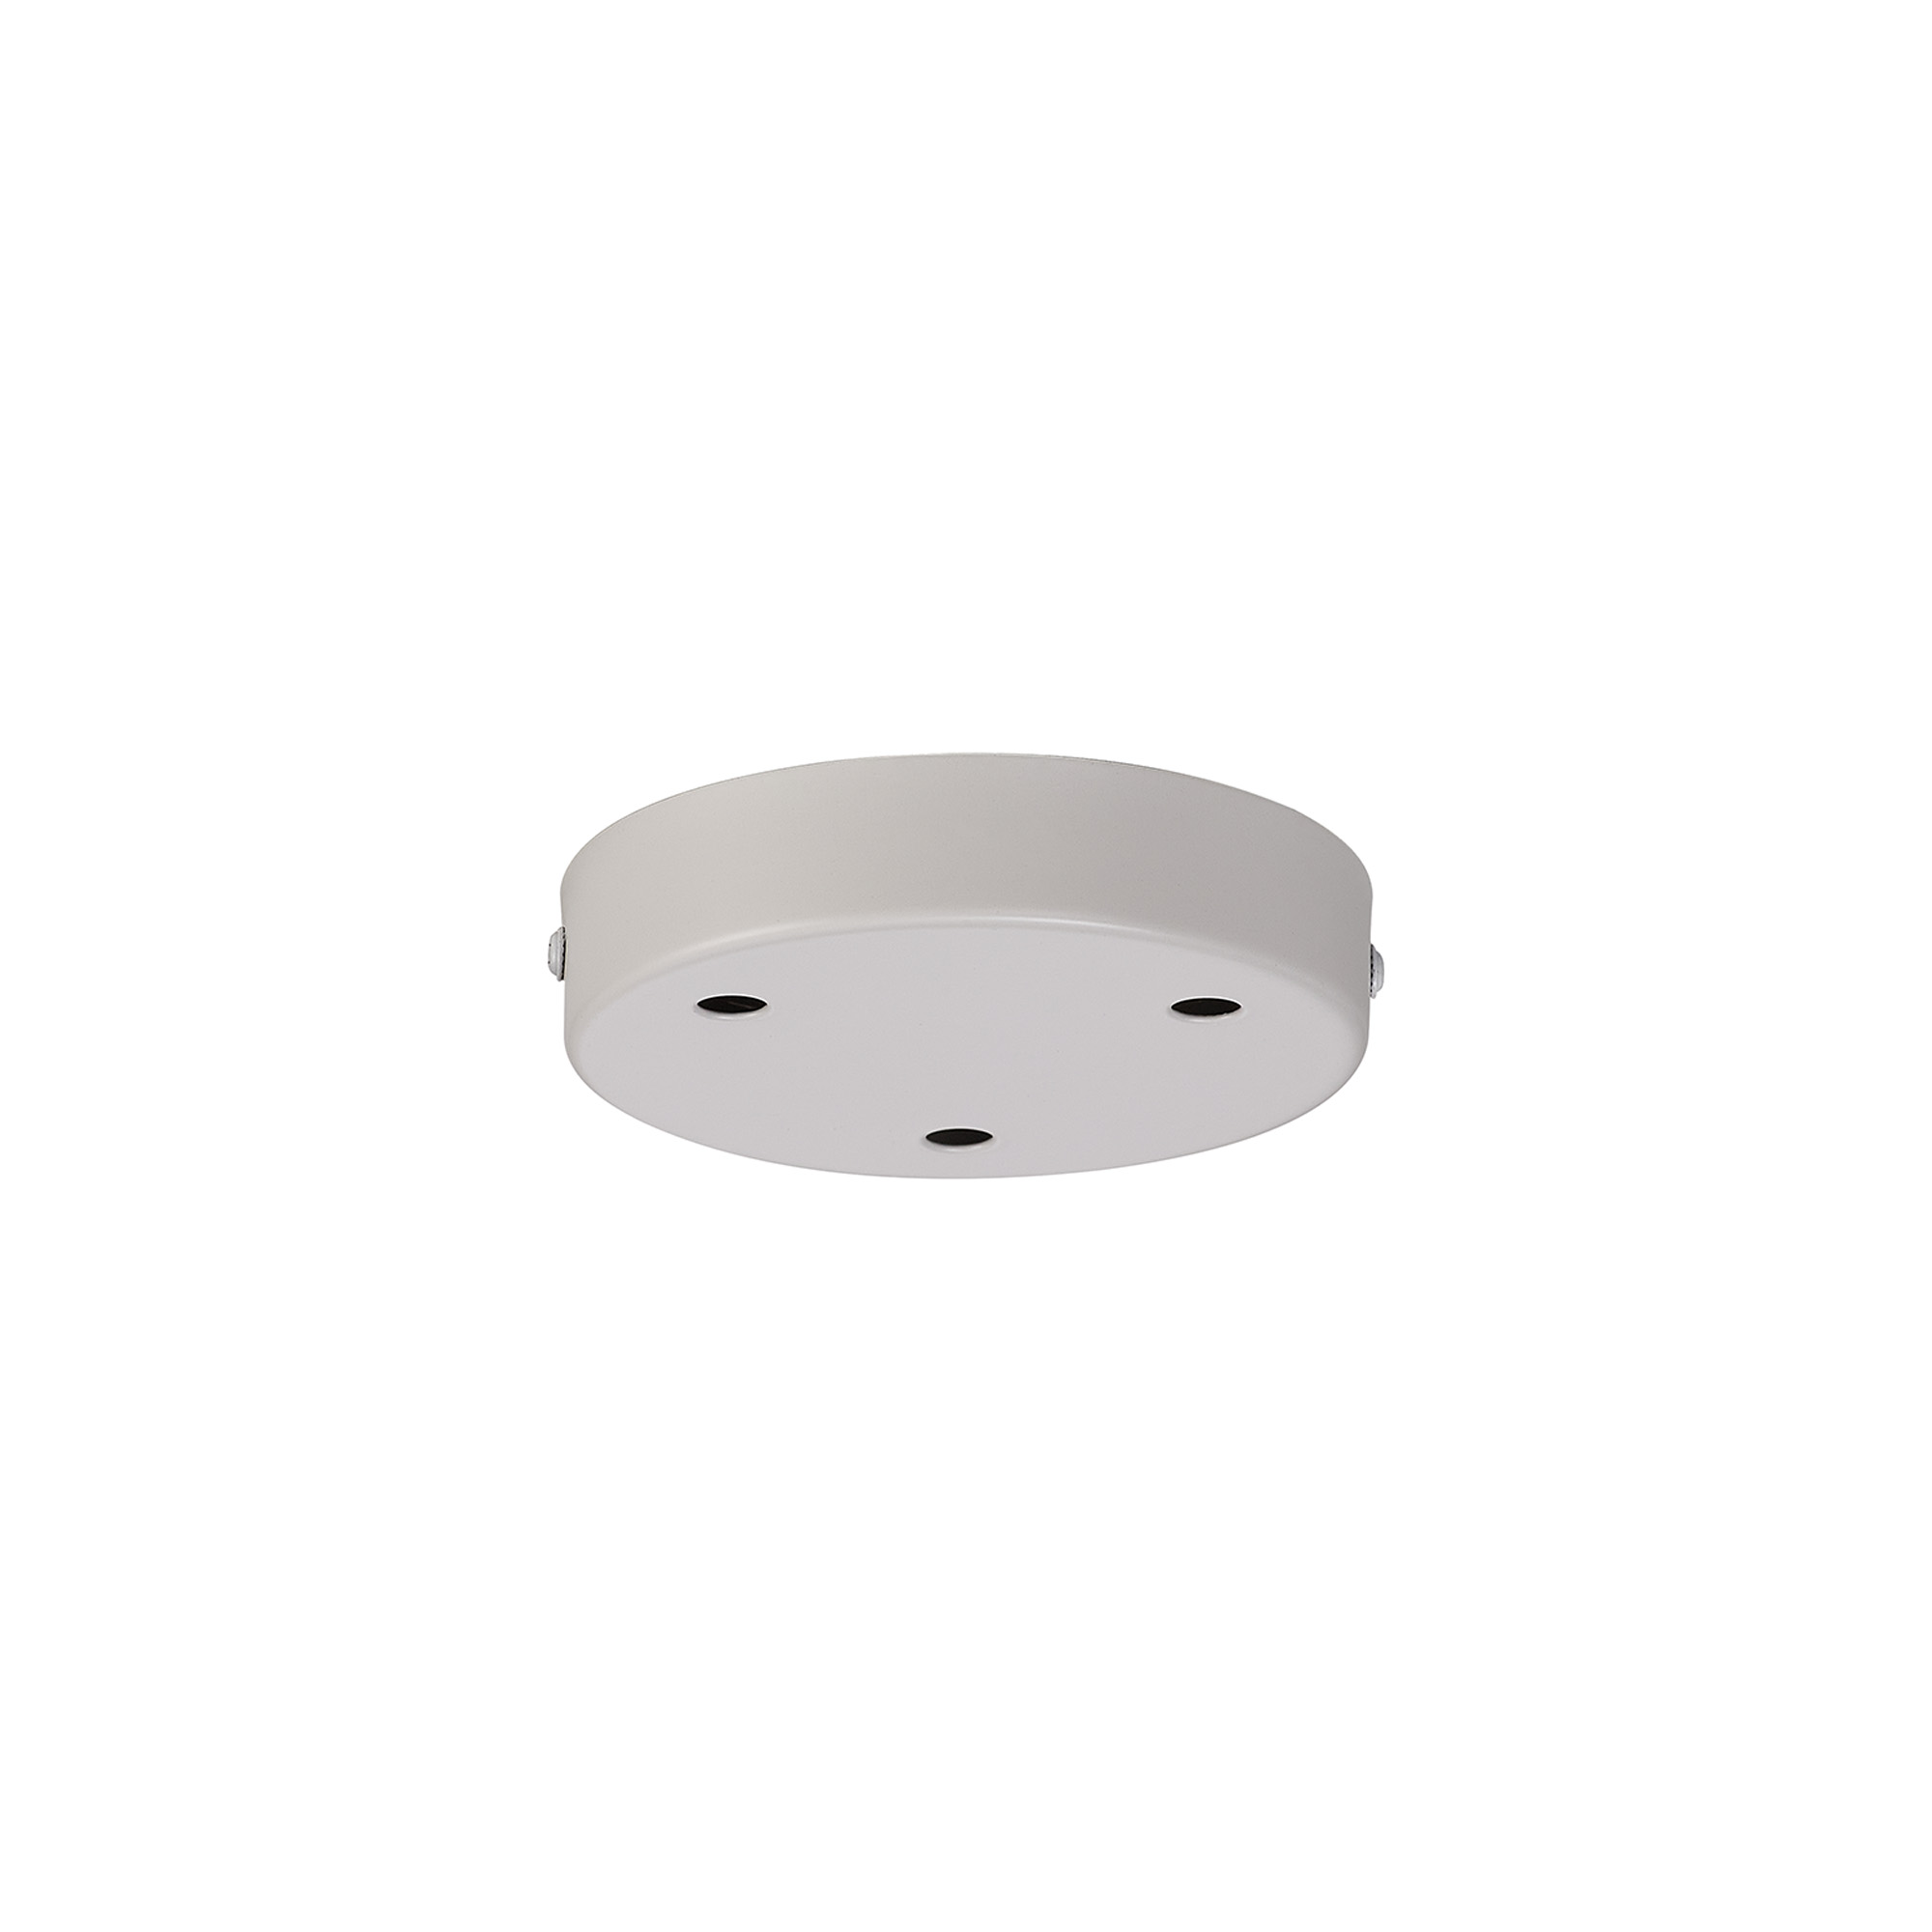 D0827WH  Hayes 3 Hole 12cm Ceiling Plate White